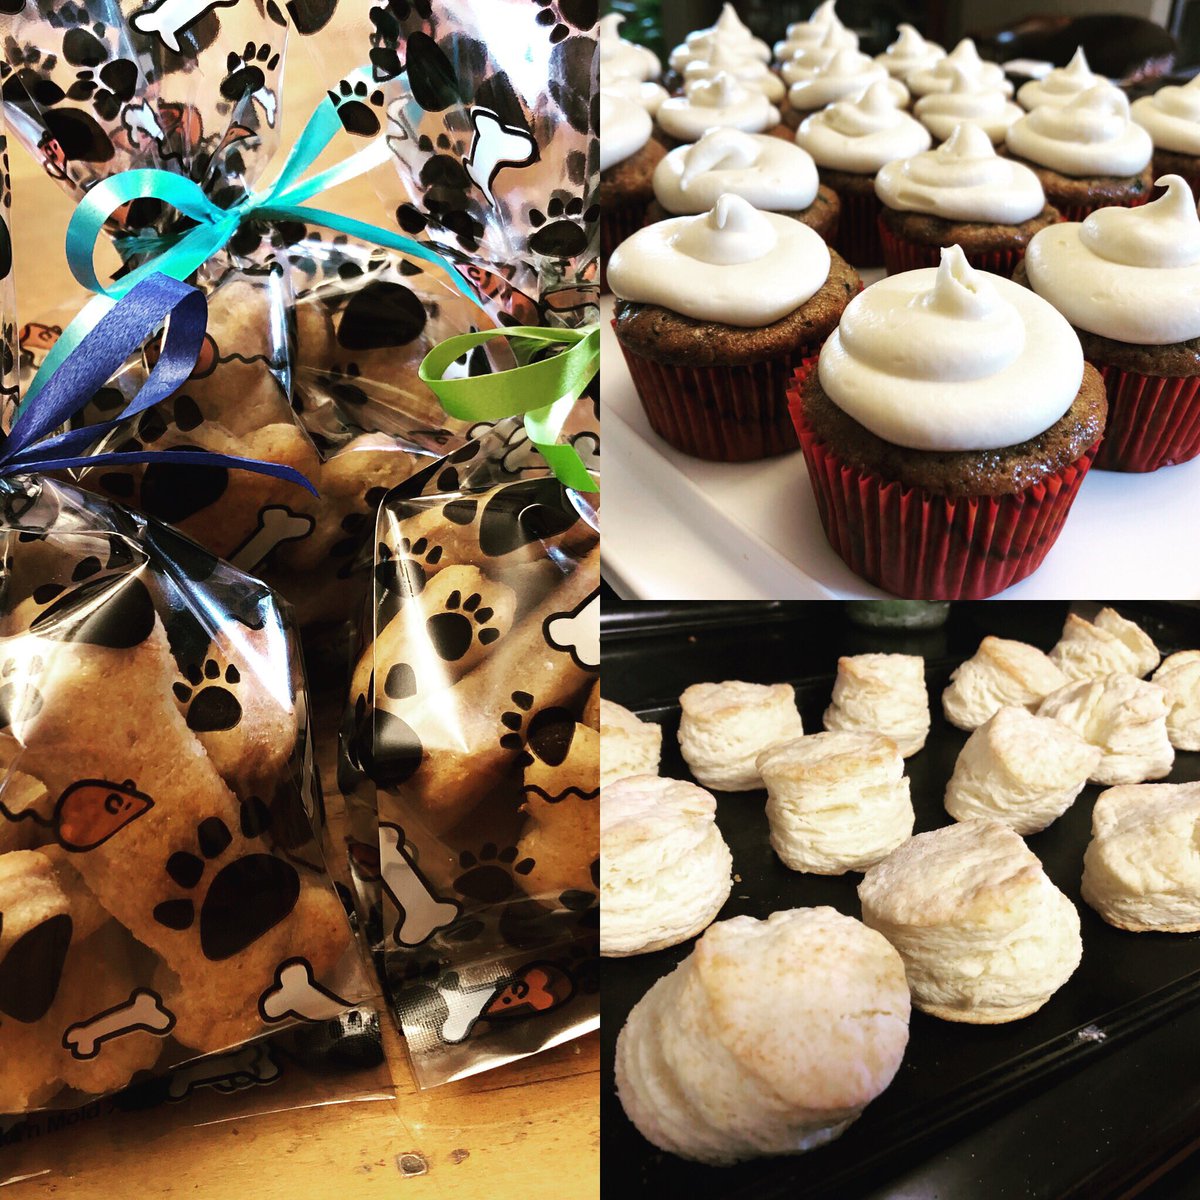 Cupcakes, biscuits and even dog cookies ready for tomorrow’s bake sale. #CeridianCares